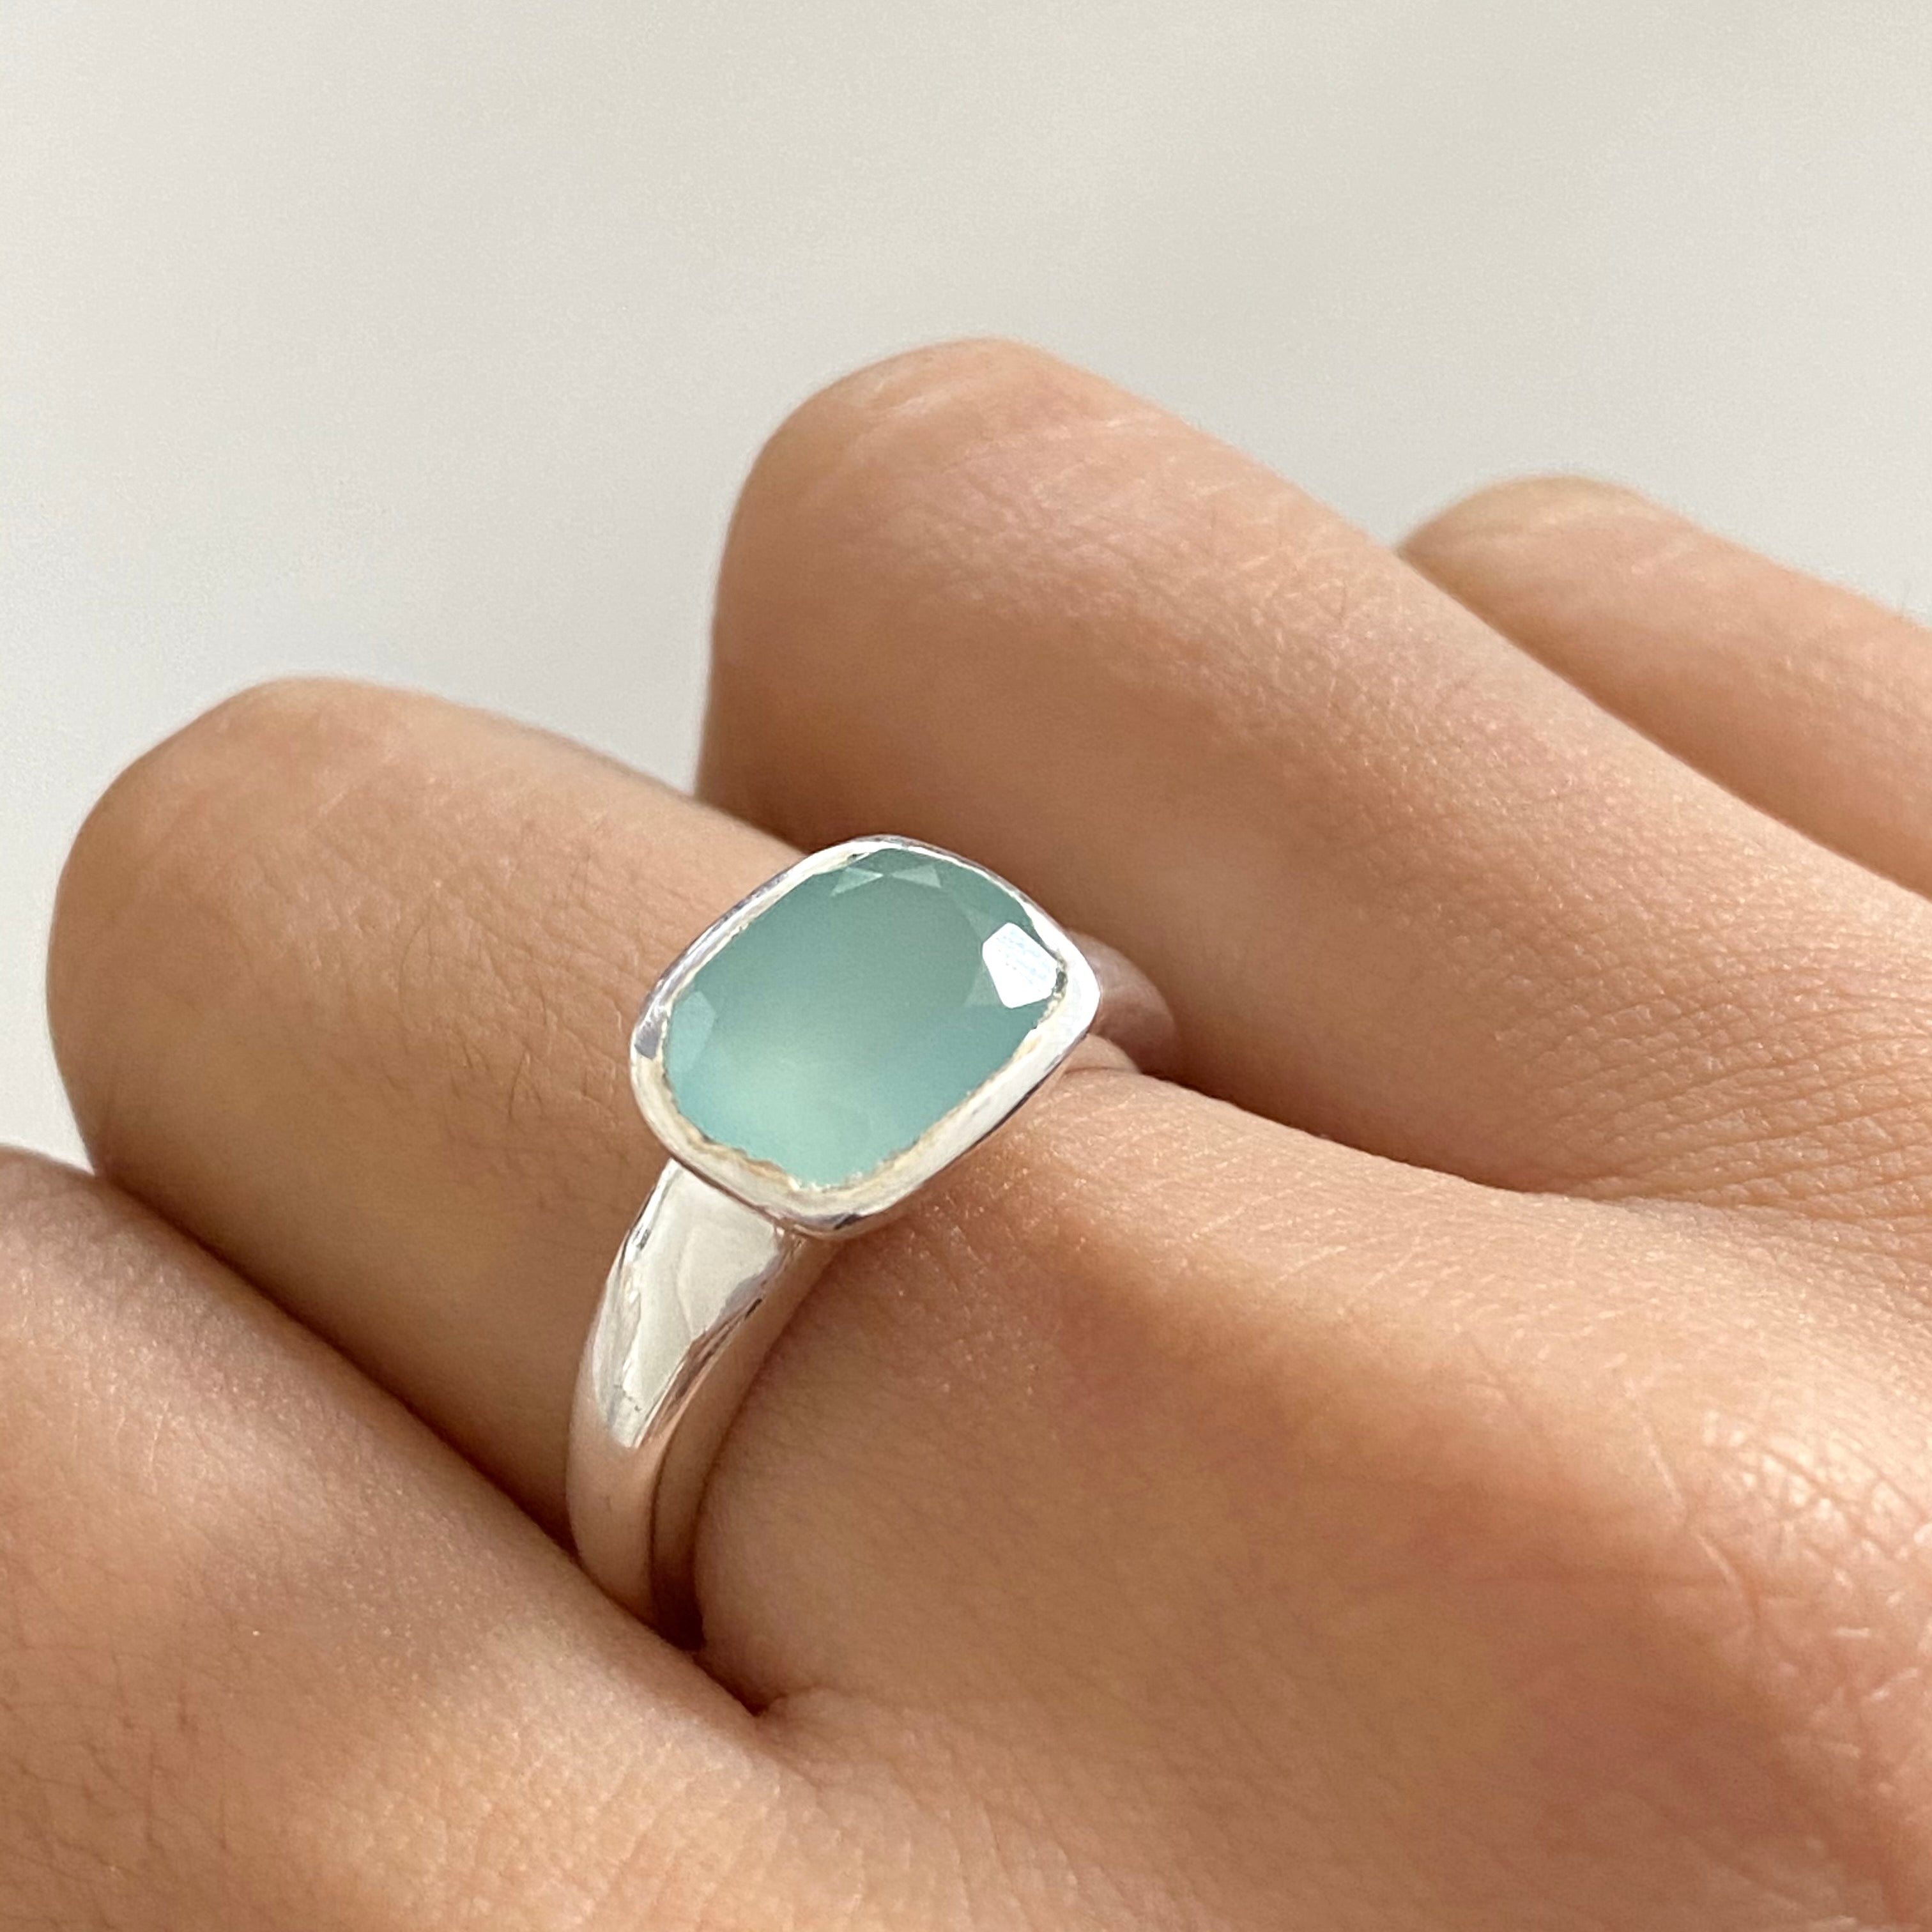 Faceted Rectangular Cut Natural Gemstone Sterling Silver Ring - Aqua Chalcedony